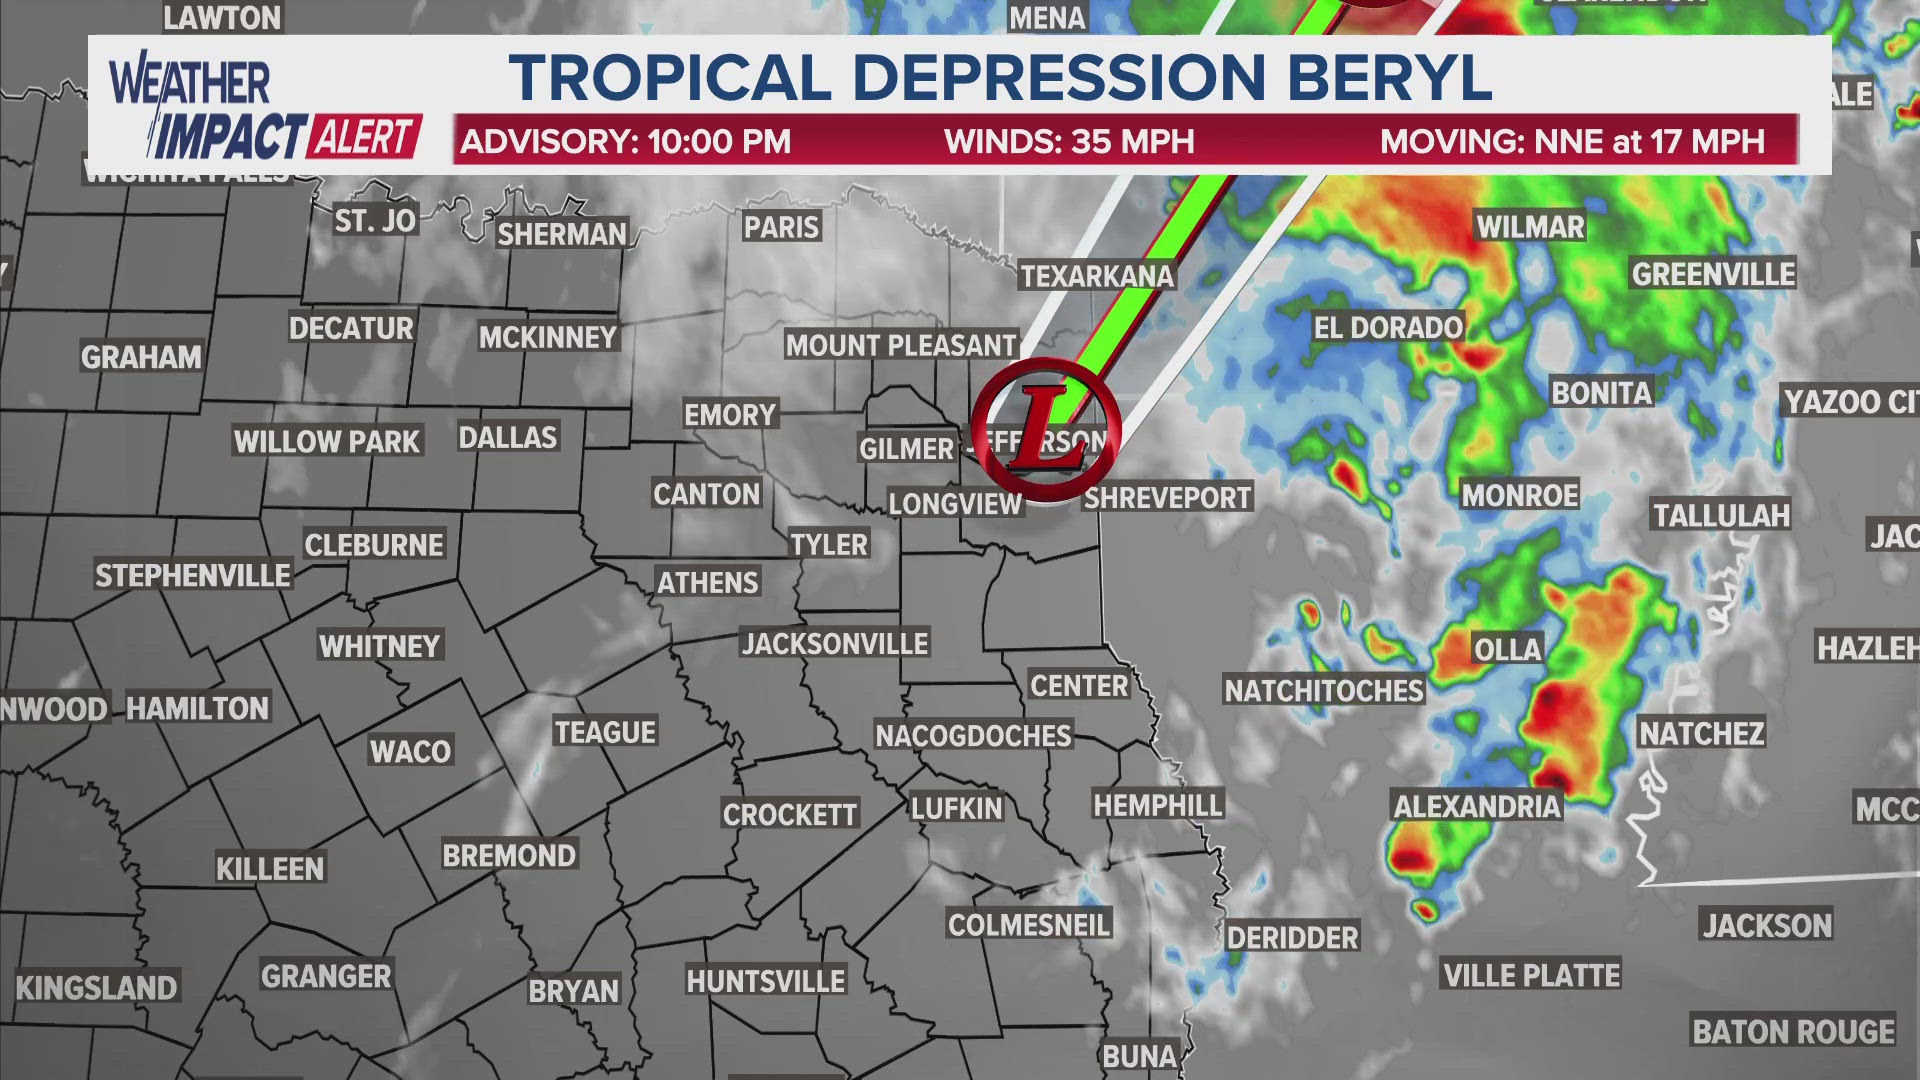 Tropical Storm Beryl, which has since weakened to tropical depression, gave some significant rainfall and wind damage in East Texas.